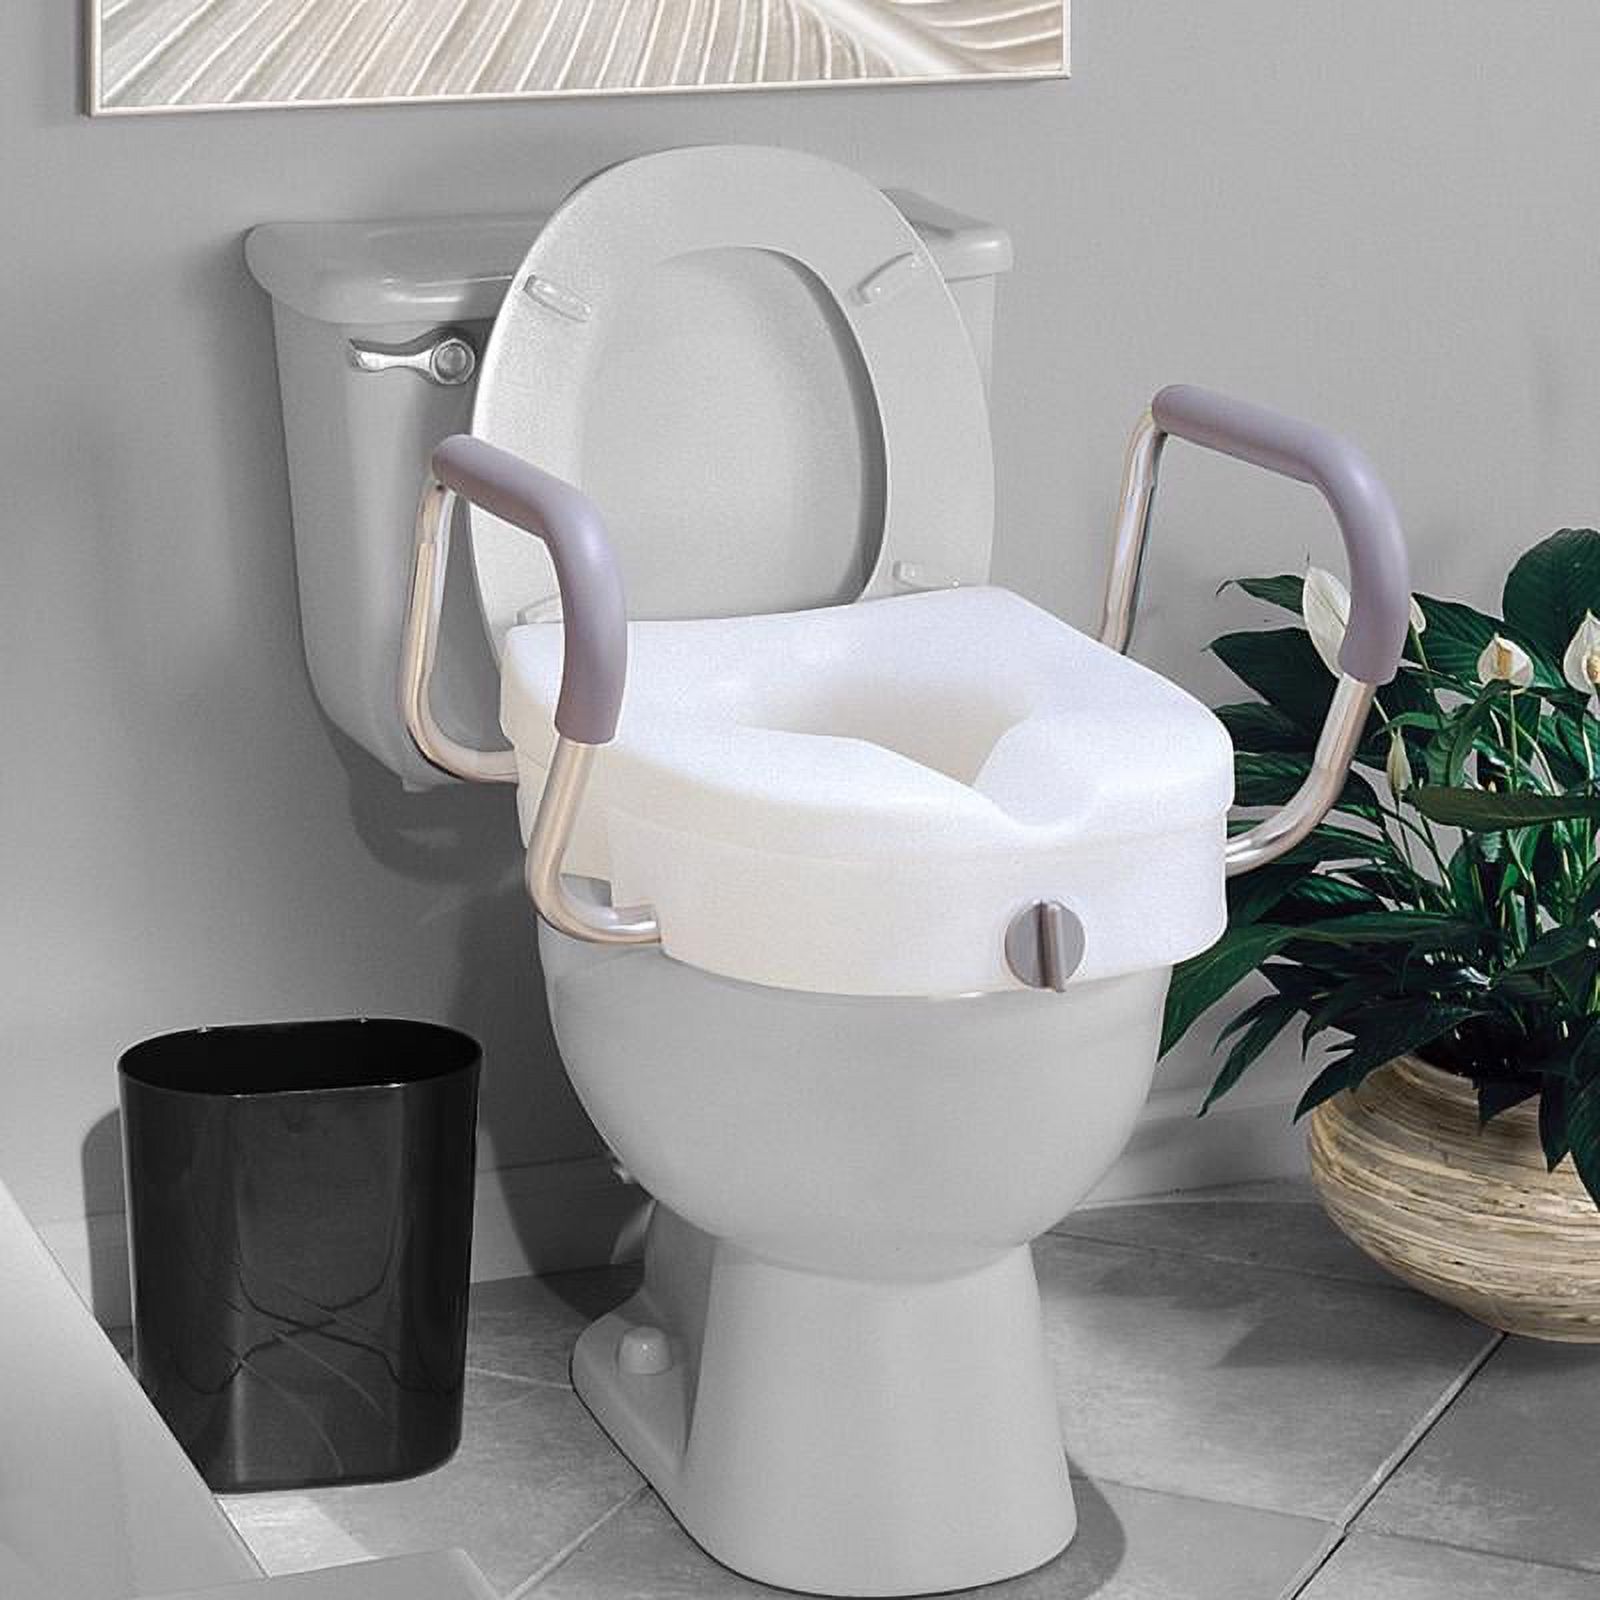 Carex EZ Lock Raised Toilet Seat with Handles, Adjustable Removable Arms, Adds 5", 300 lb Capacity - image 3 of 5